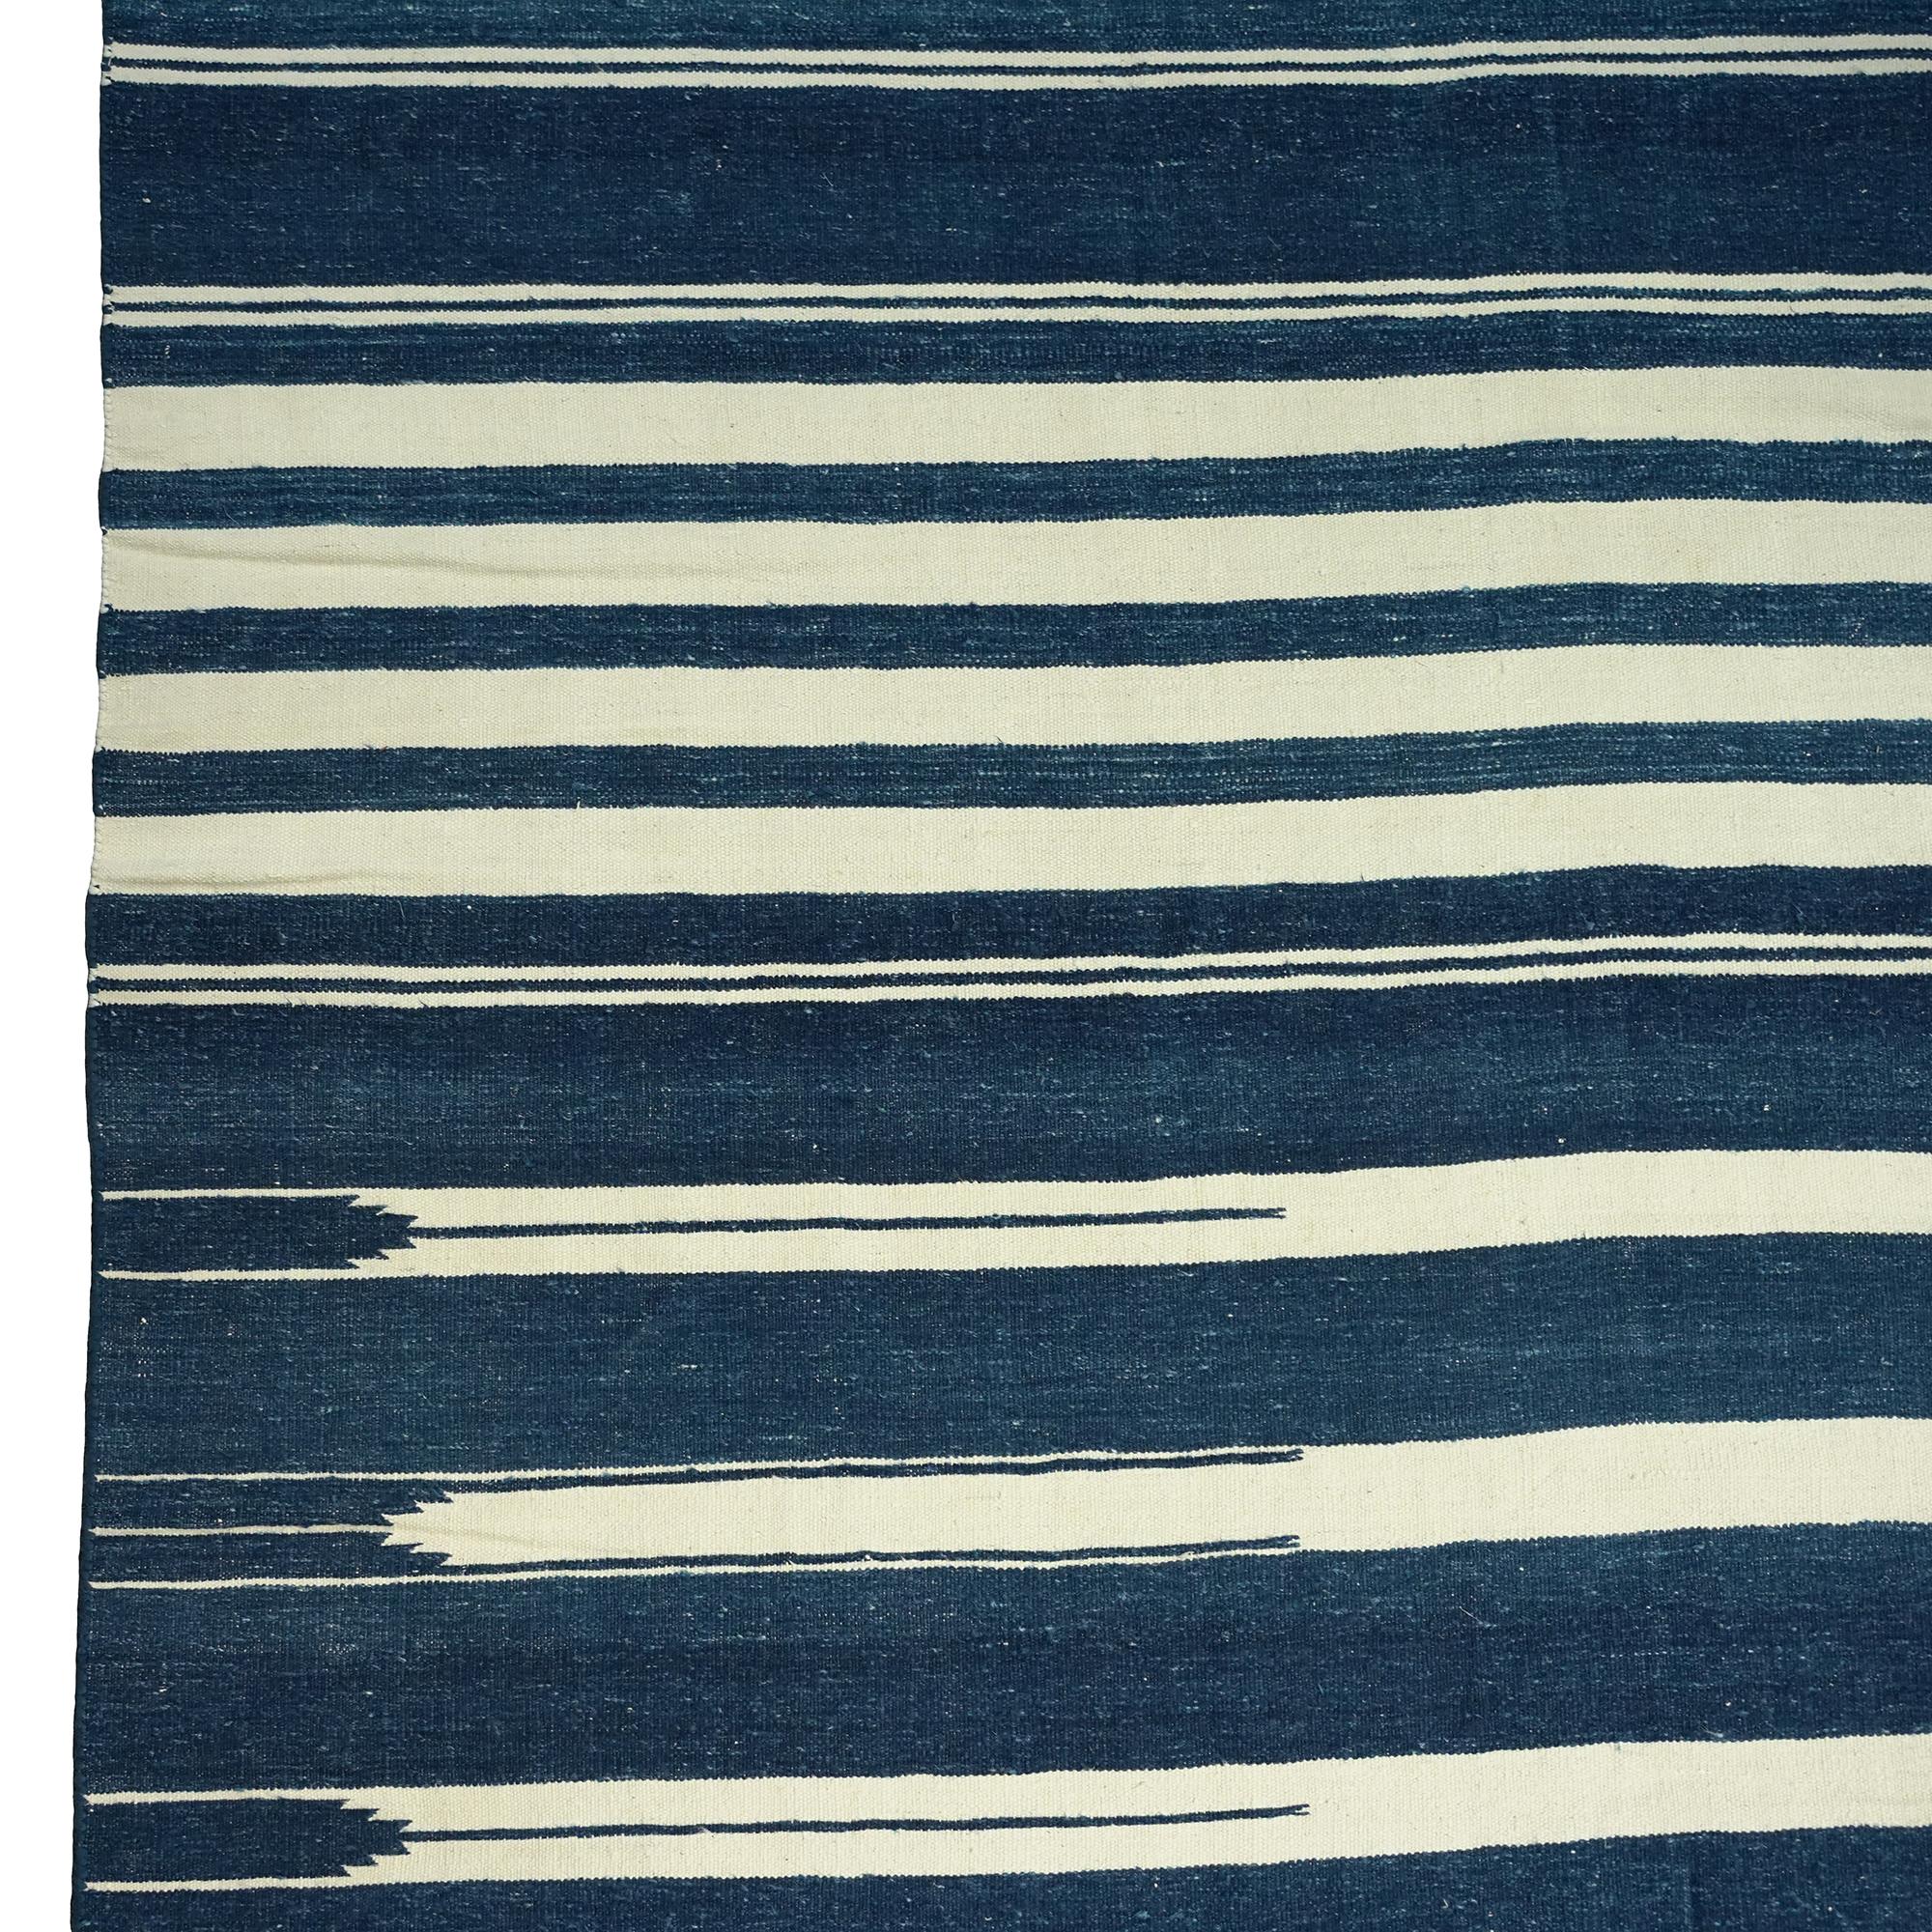 Vintage Dhurrie Rug with White and Blue Stripes, from Rug & Kilim In Good Condition For Sale In Long Island City, NY